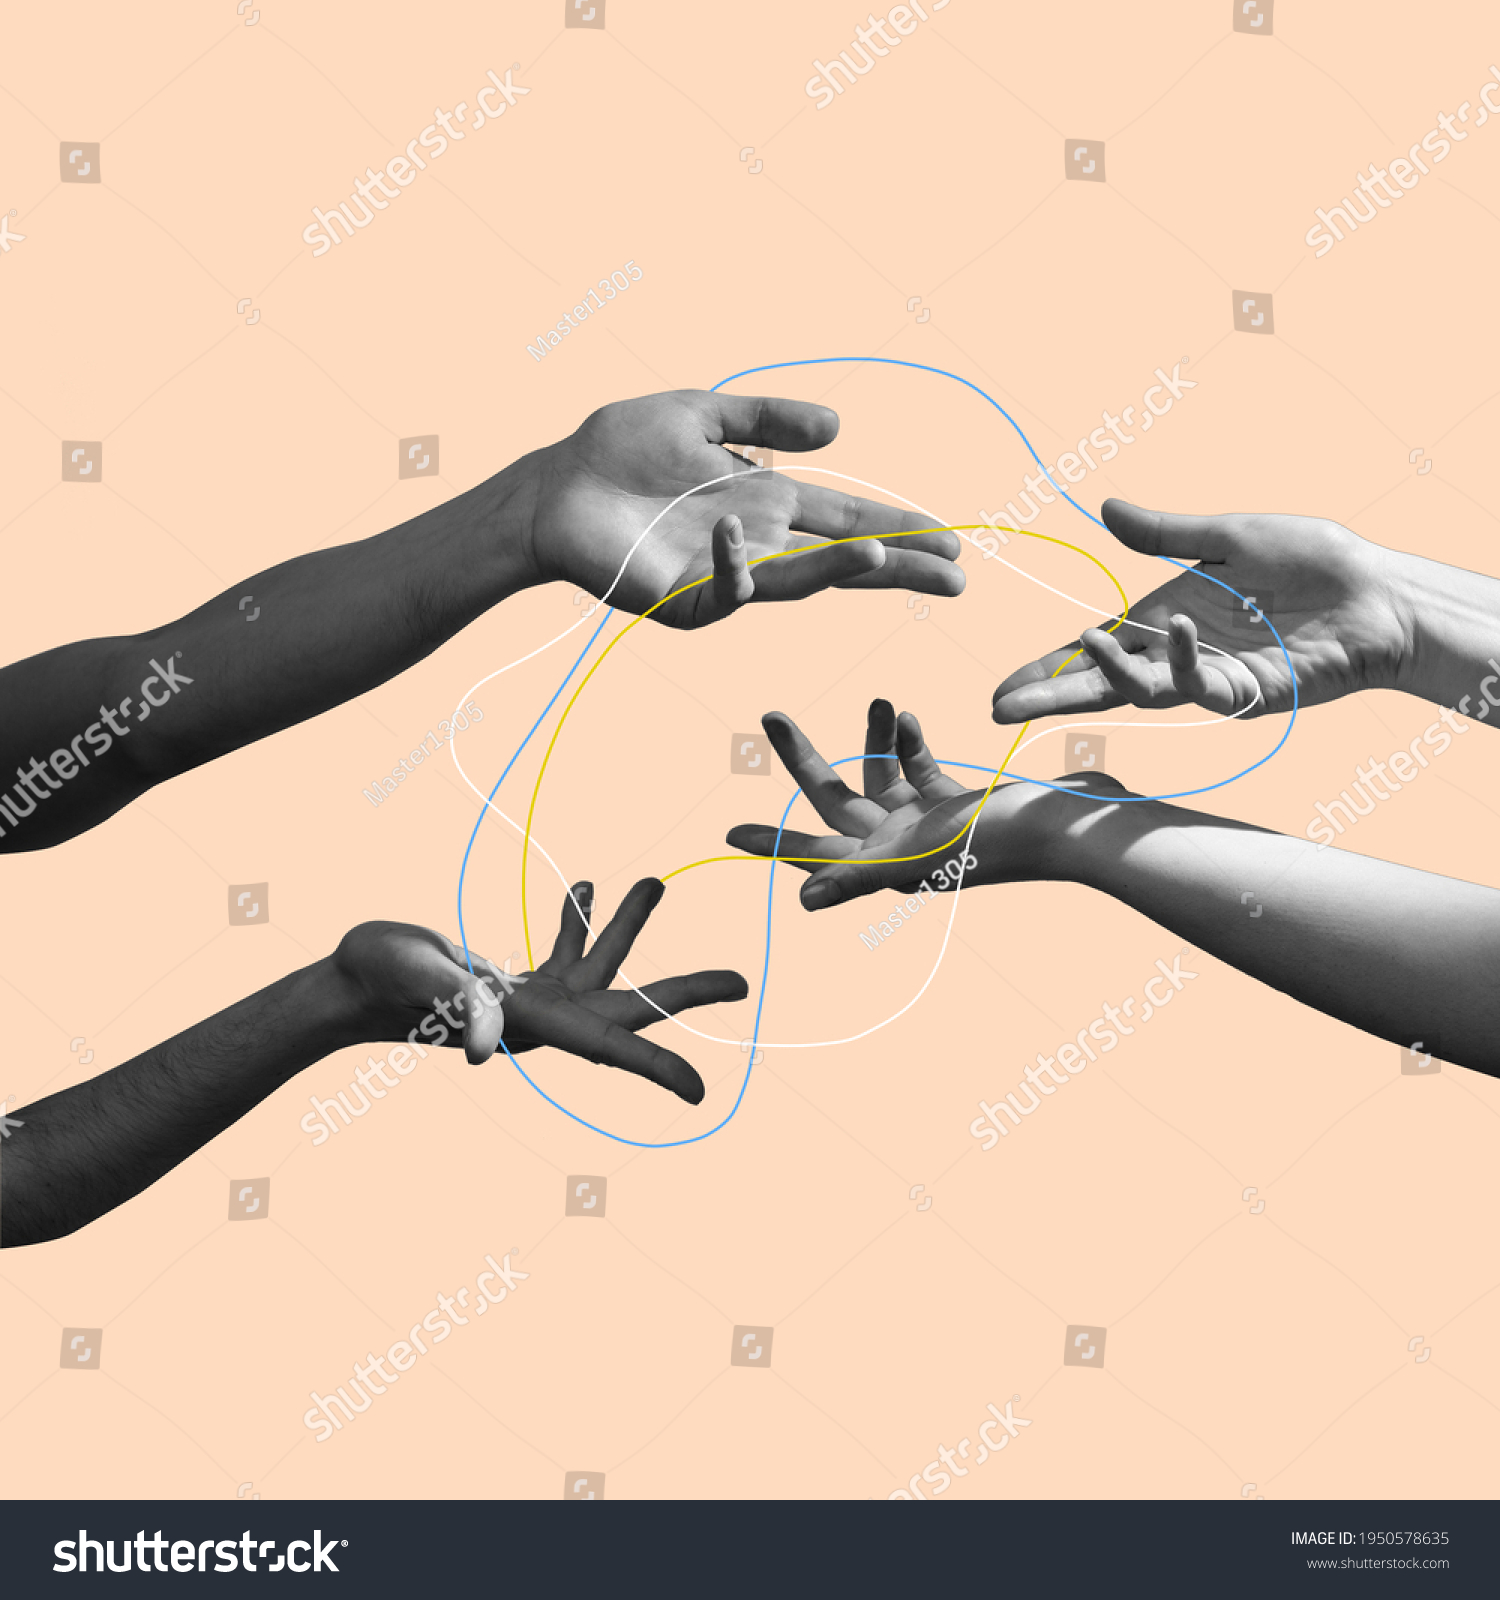 Difficulties. Hands aesthetic on bright background, artwork. Concept of human relation, community, togetherness, symbolism, surrealism. Light and weightless touching unrecognizable #1950578635